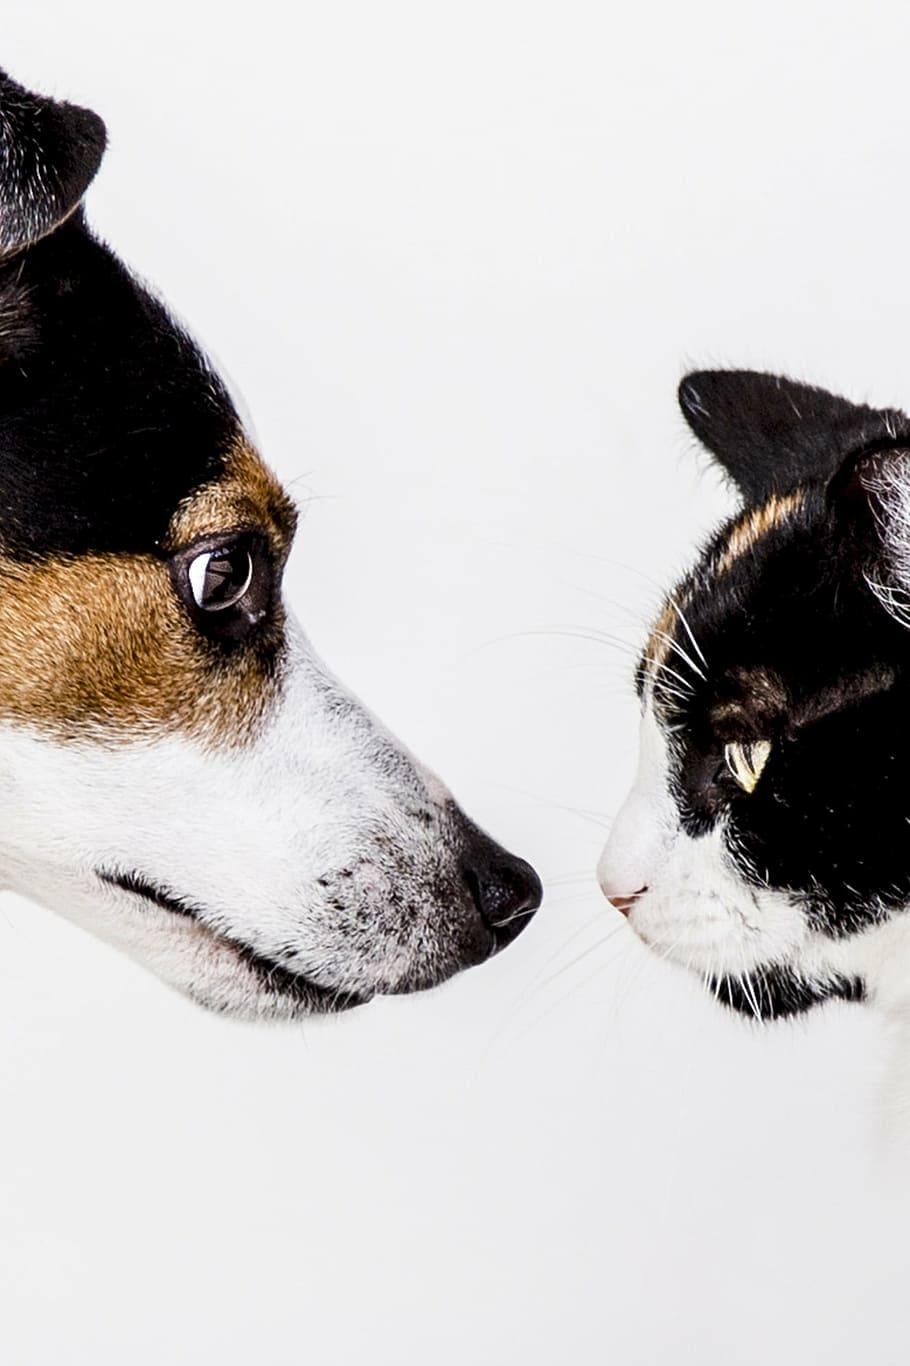 black-brown-and-white dog, cat, white, background, cats, dog, animal, dogs, animals, pet